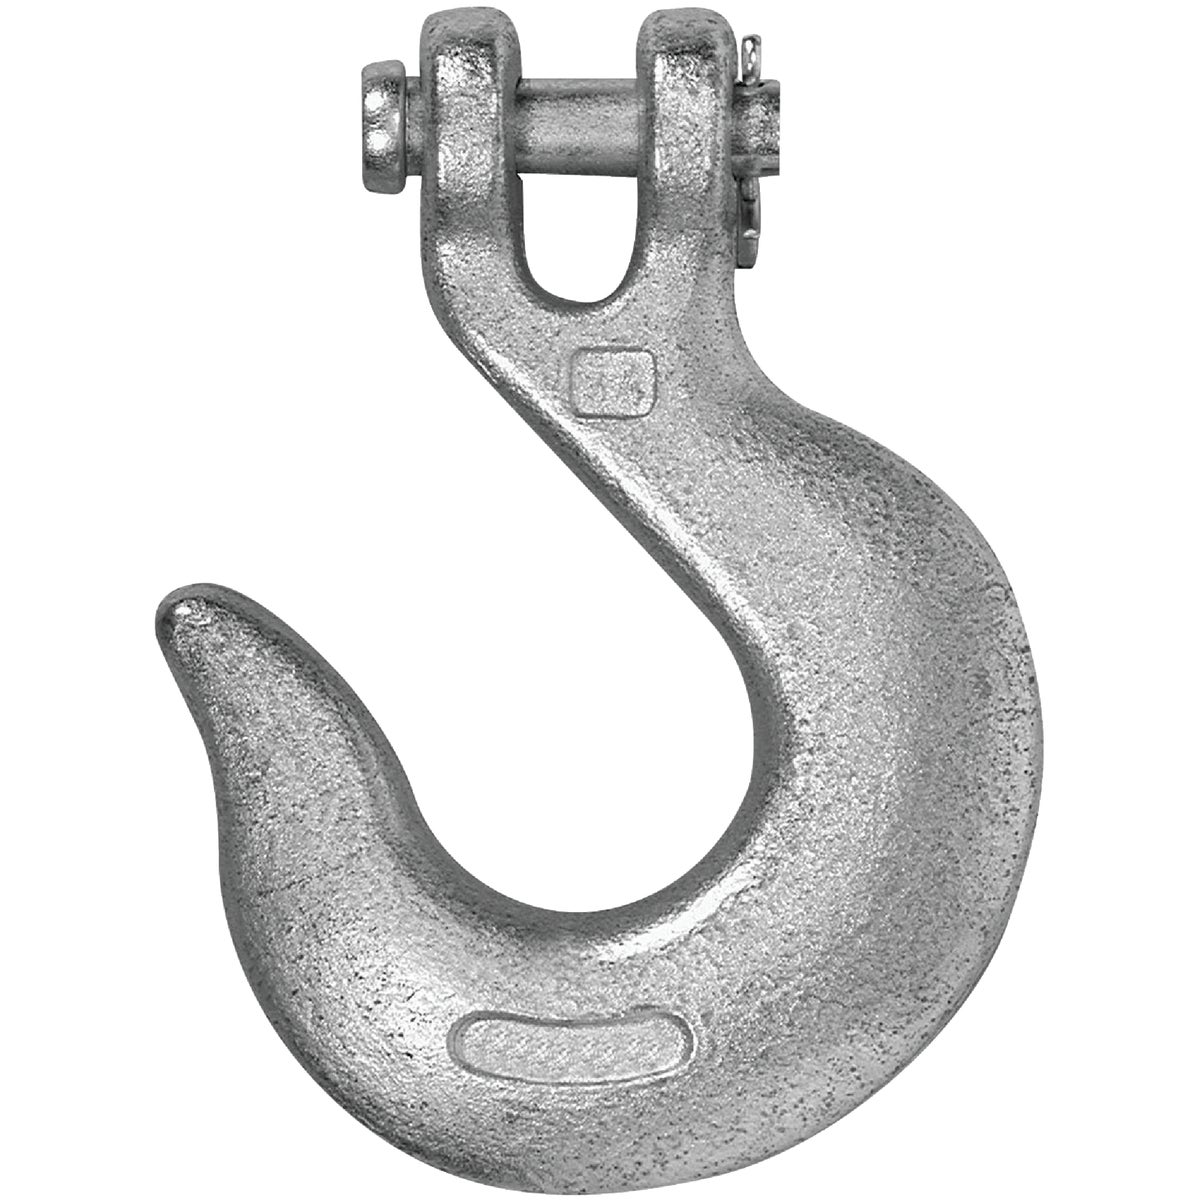 Item 705071, Durable clevis slip hook. Eliminates connecting links and cold shuts.